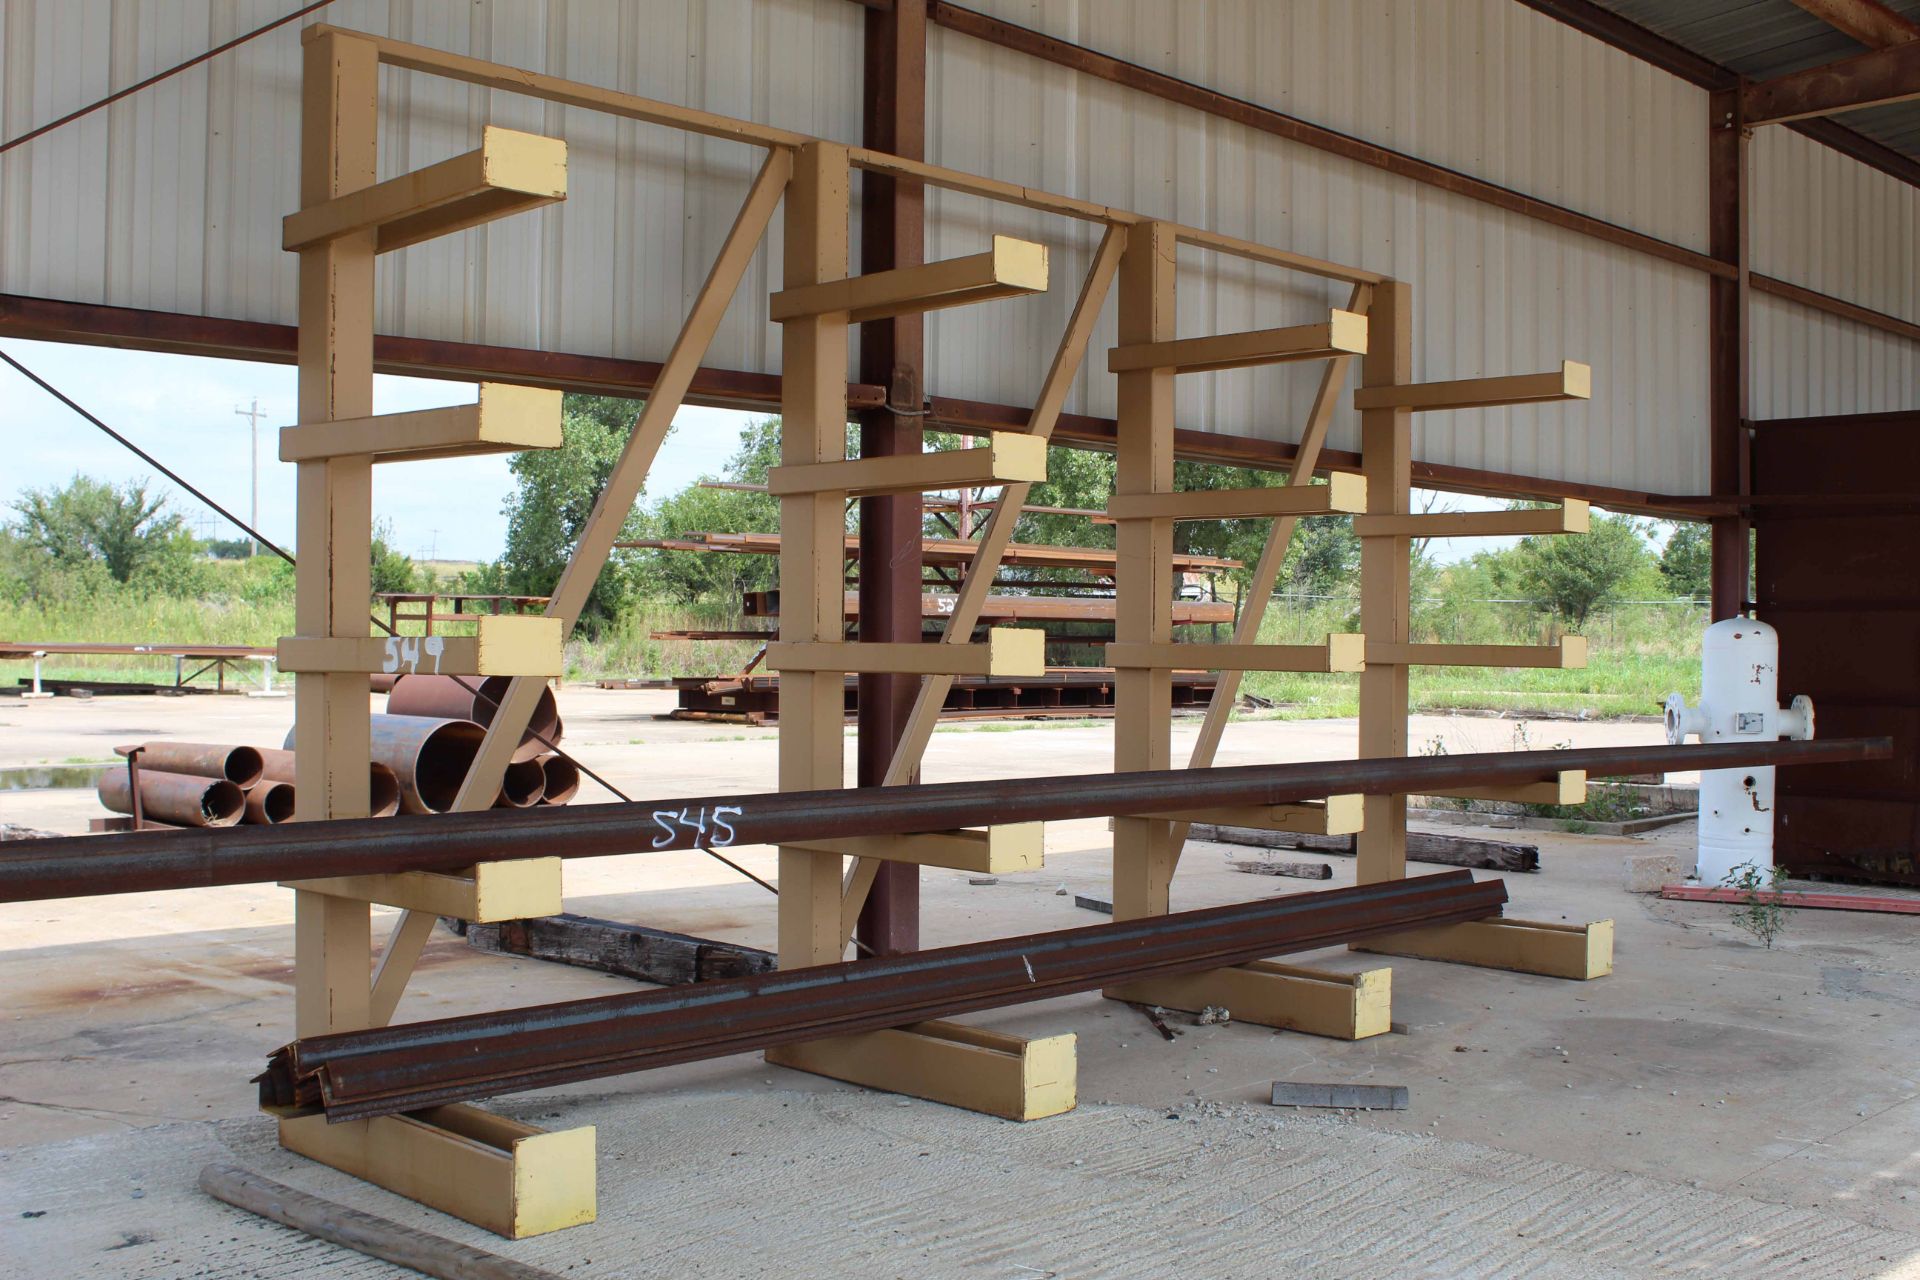 FABRICATED STEEL CANTILEVER MATERIAL STORAGE RACK, 18'L. x 10' ht. x 5-tier, 36" arms, sgl. arm,